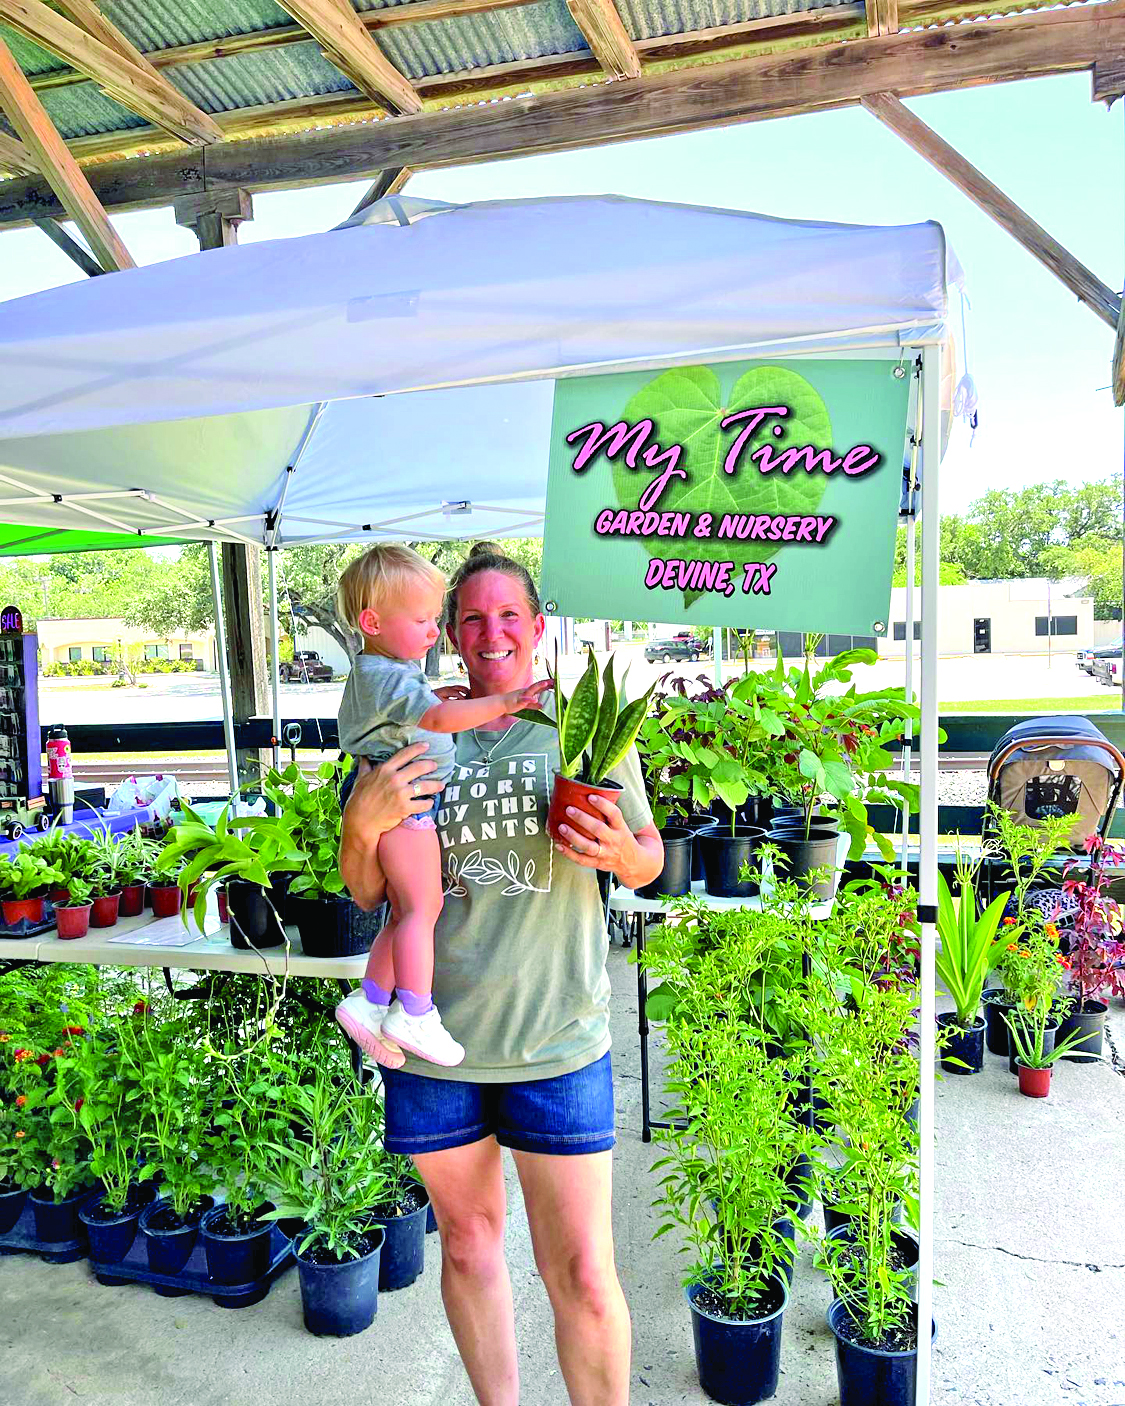 New business alert! My Time Garden & Nursery Opening in Devine Sept. 15th